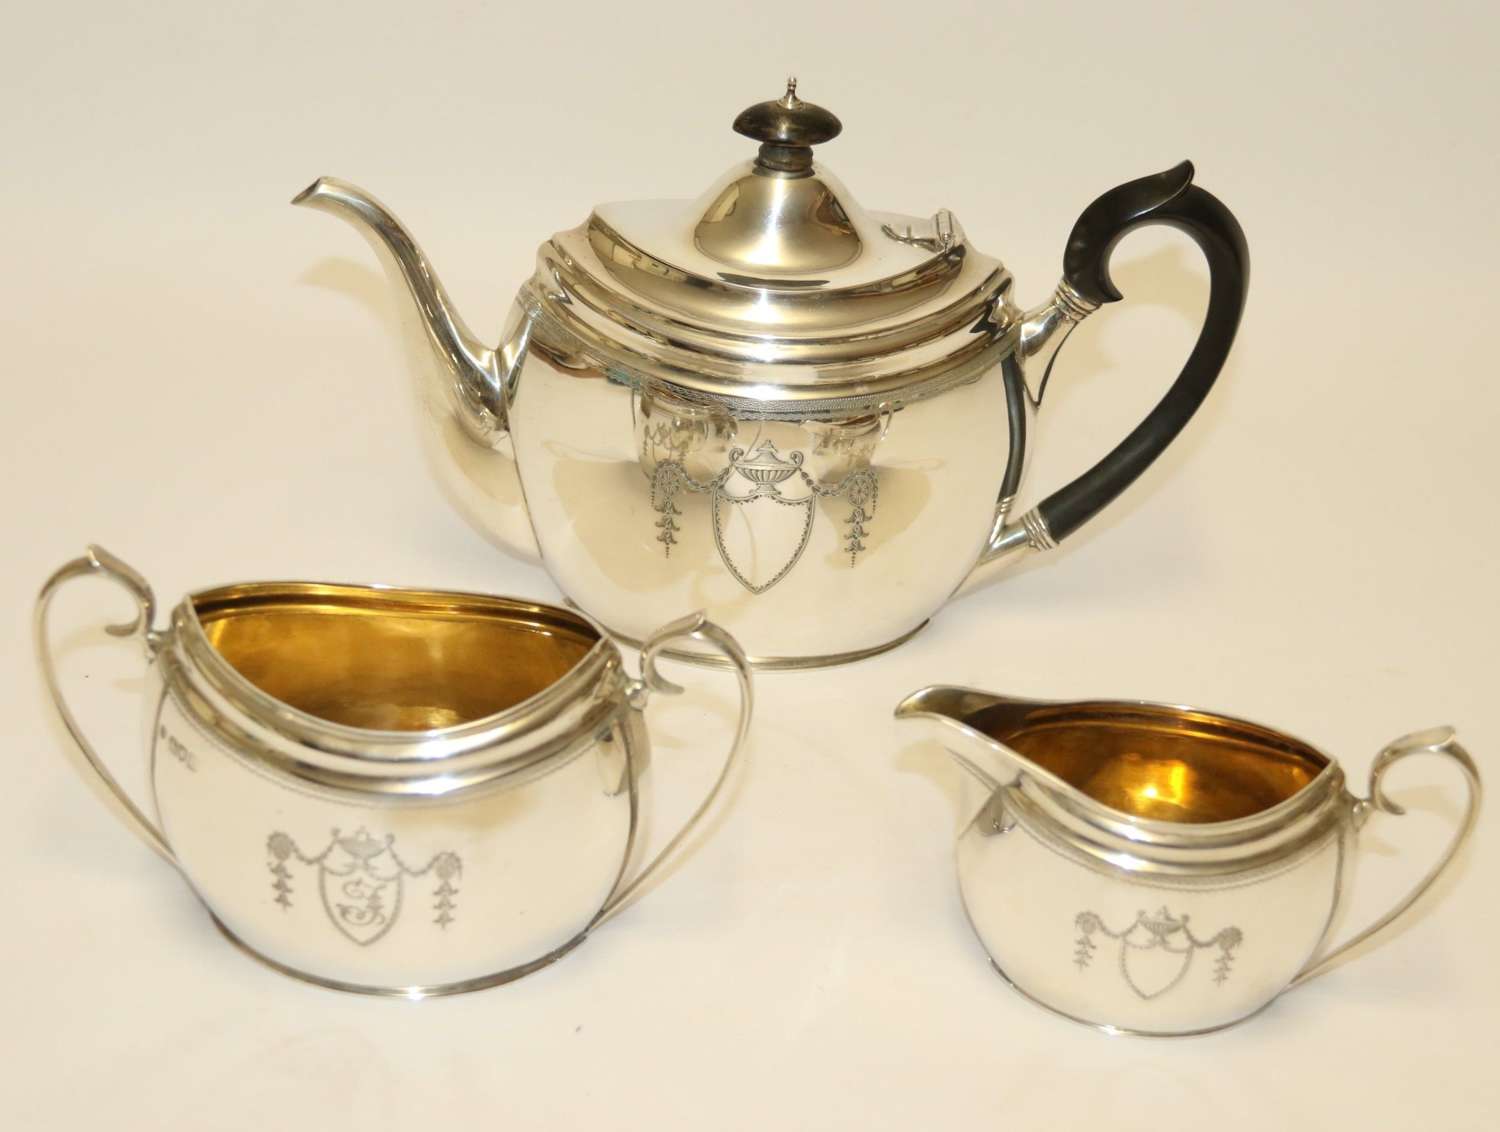 Exceptional Silver Tea Set By Edward Barnard And Sons